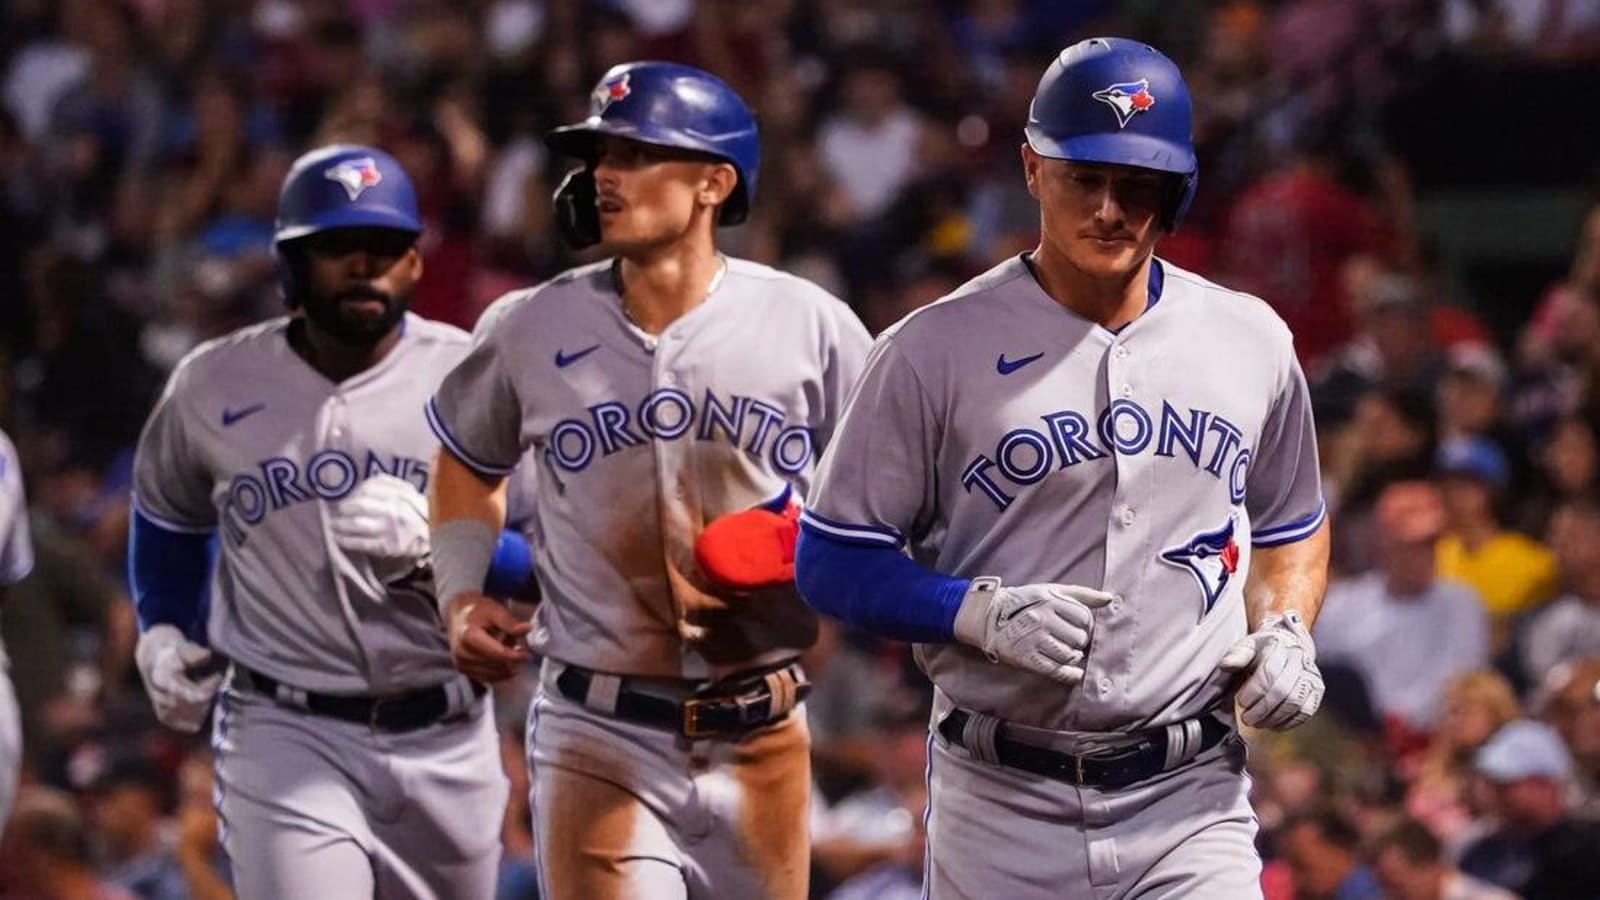 Toronto Blue Jays vs. Boston Red Sox prediction and odds Wed., 8/24: Red Sox hammered by more injuries